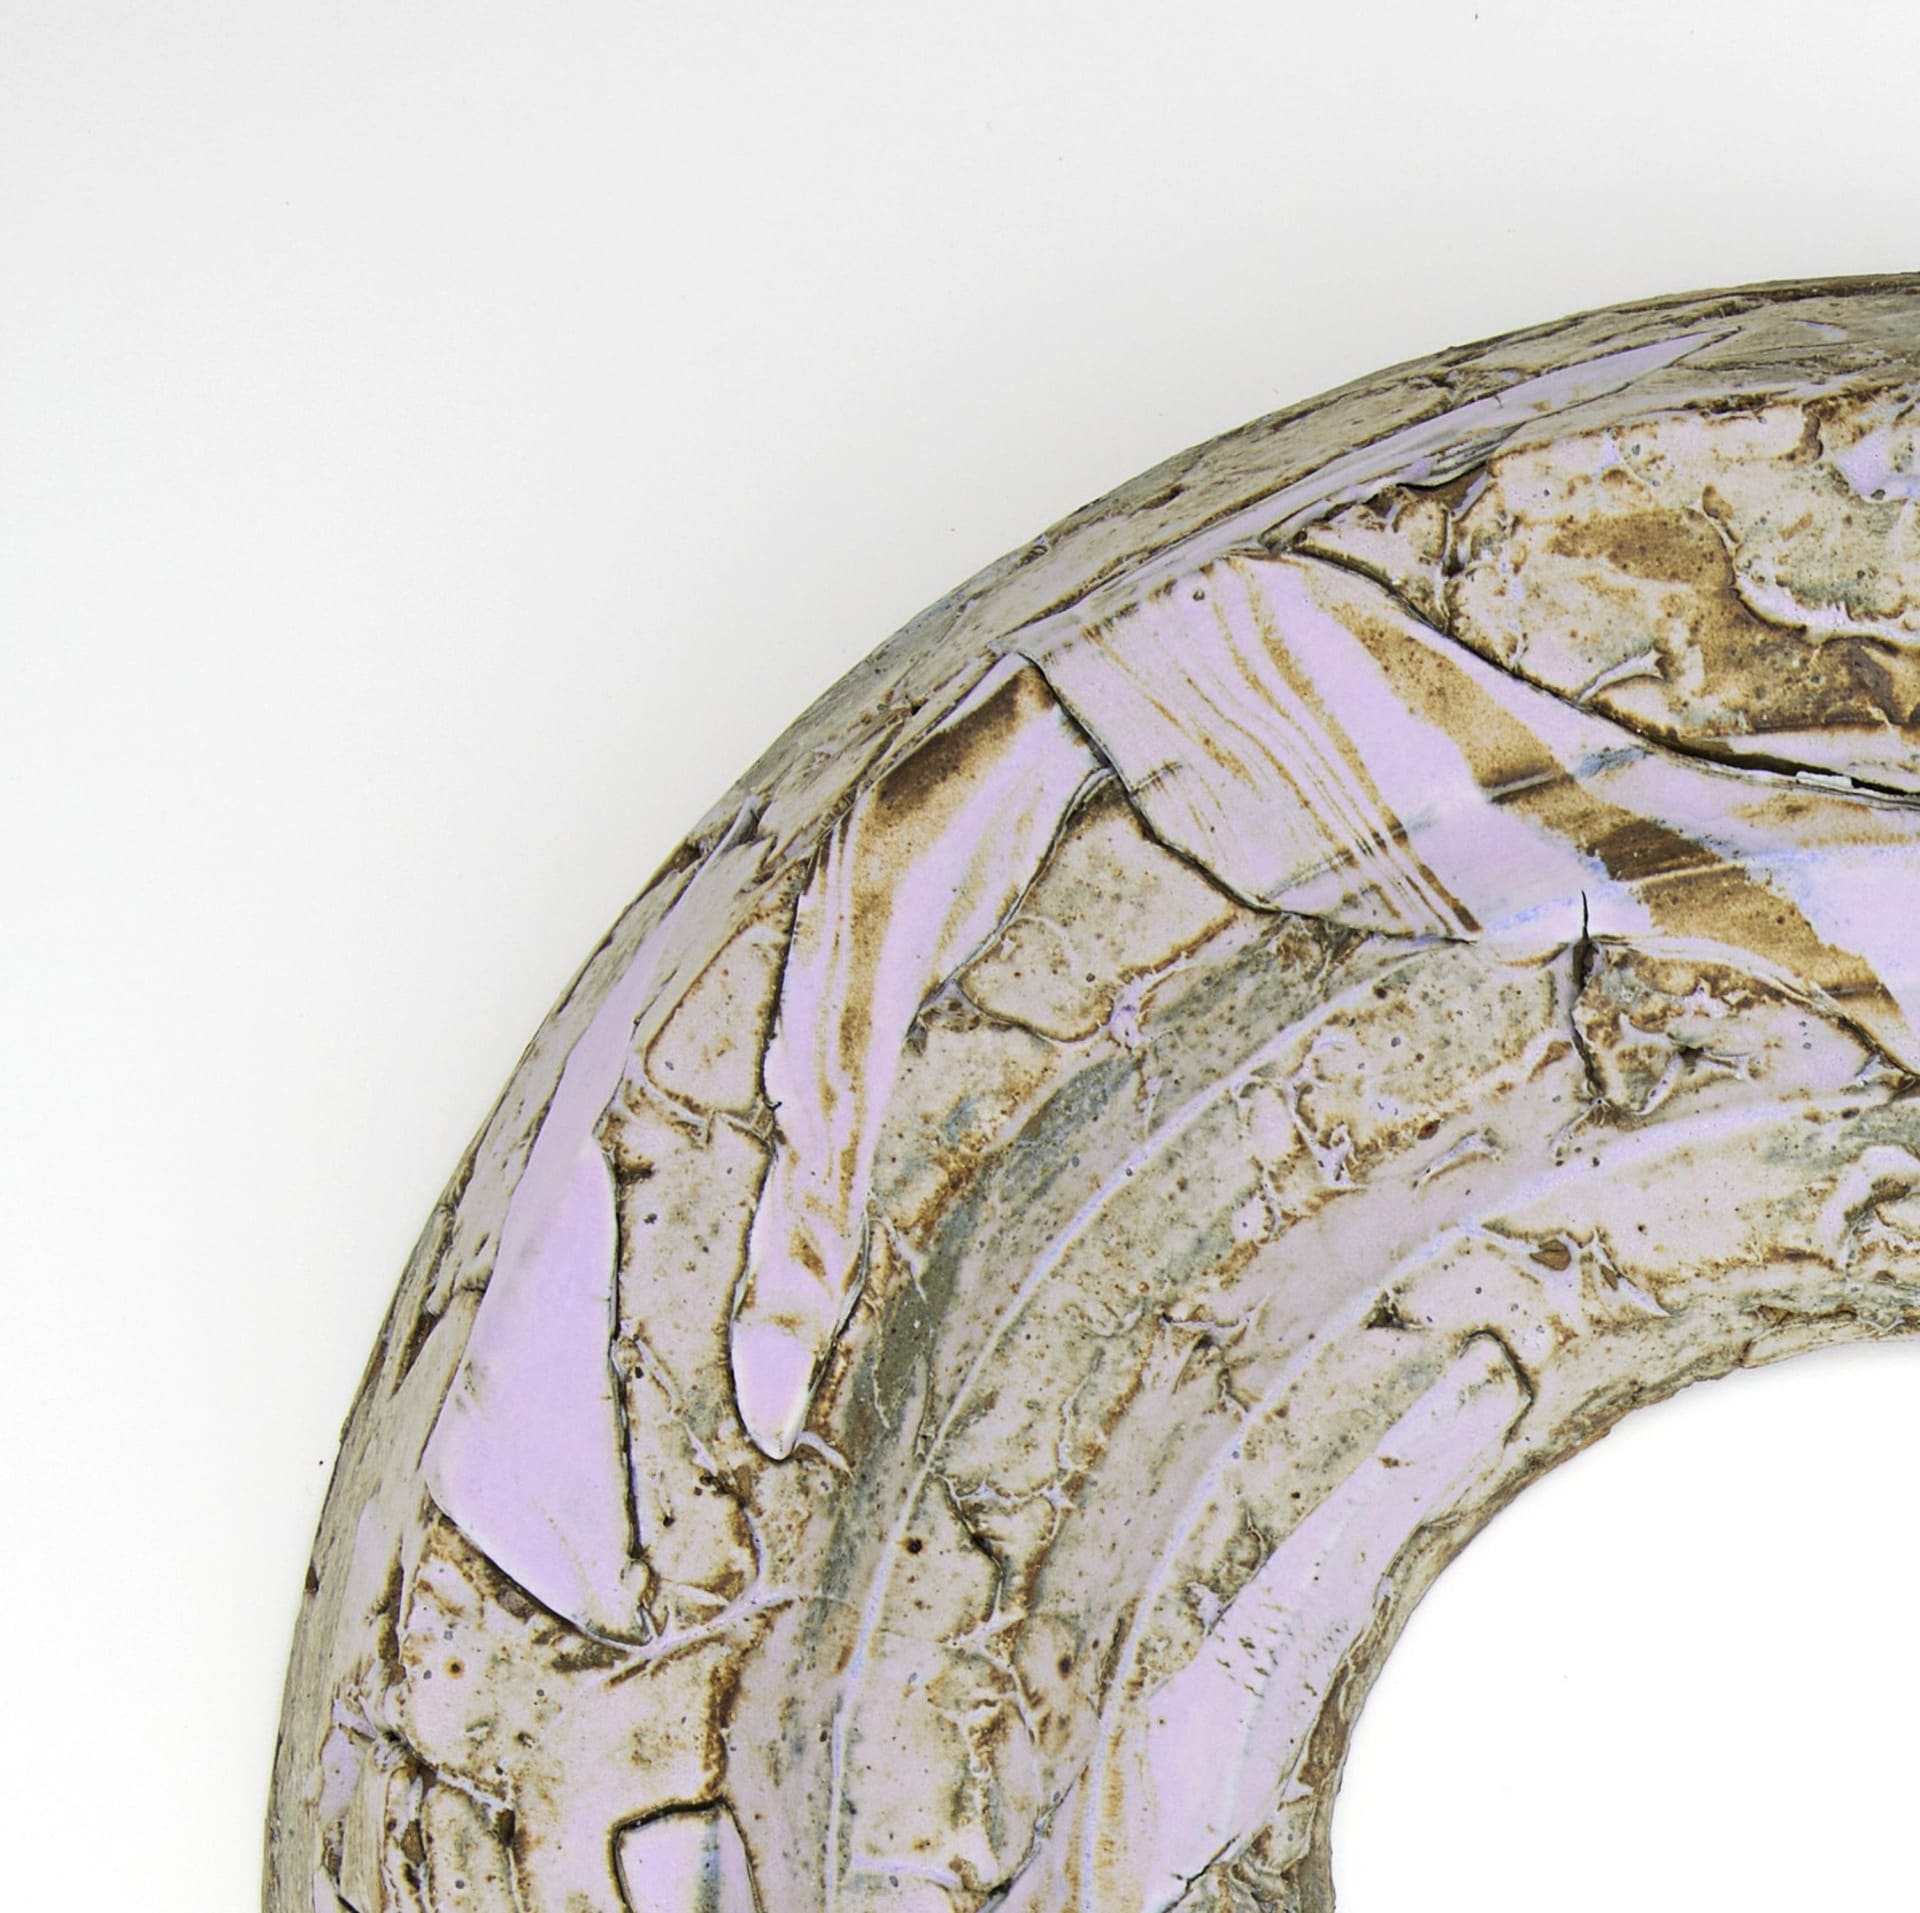 Organic Circular form in pastel pinks, purples and browns, Detail